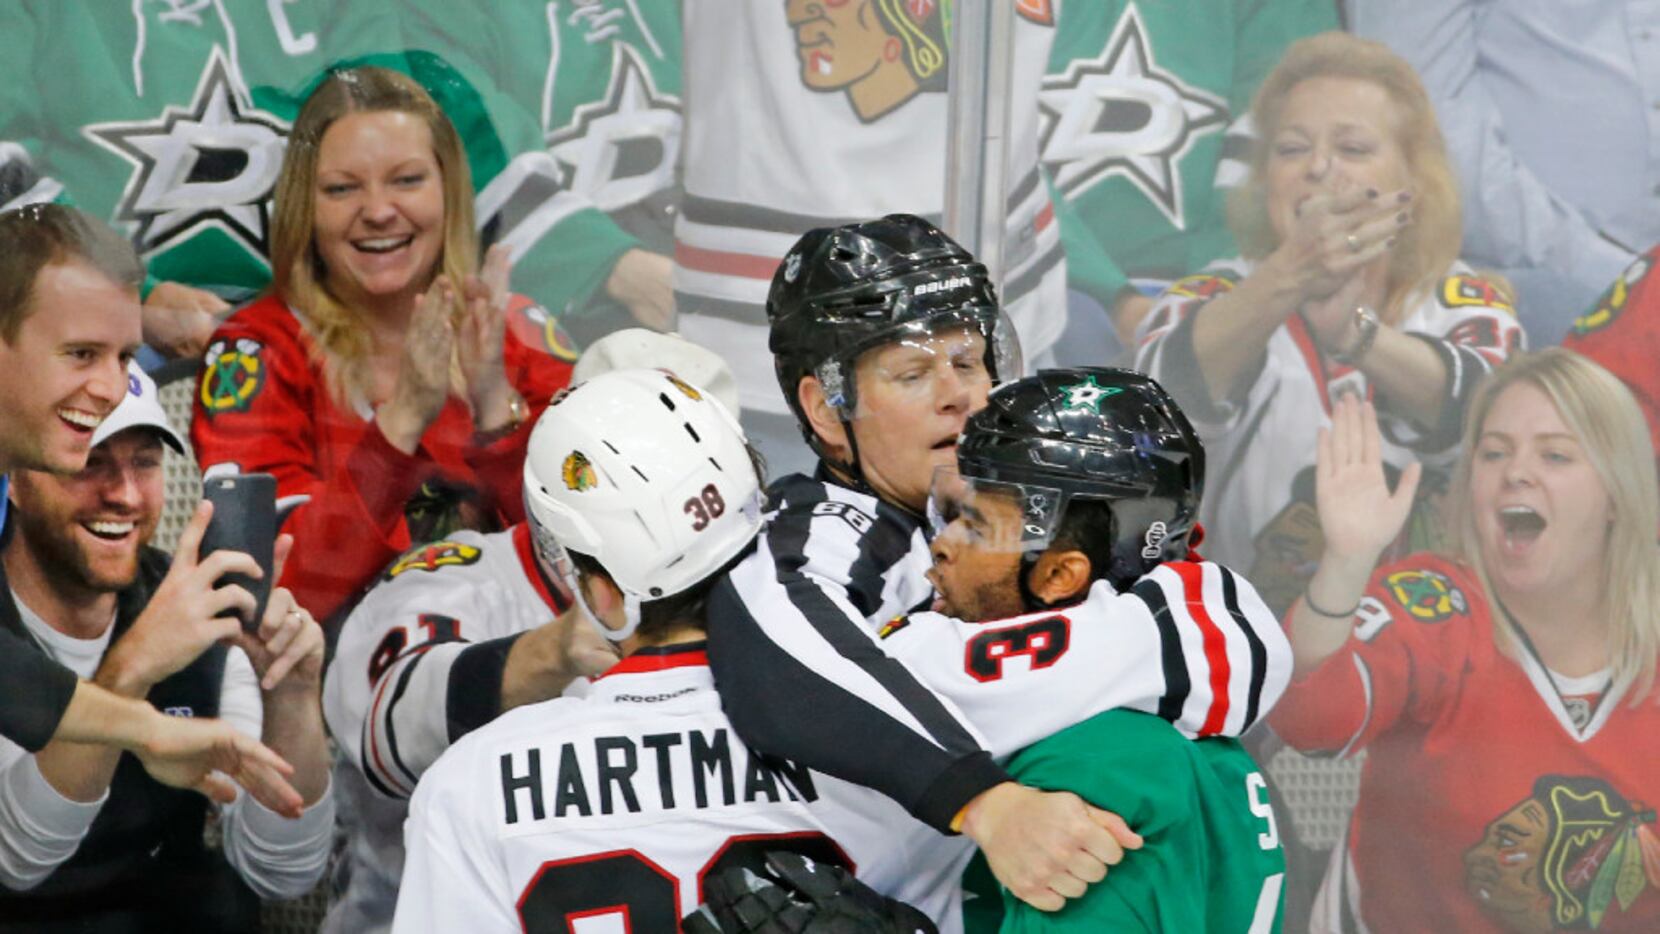 Fans enjoy getting an up close look at the skirmish between Dallas Stars center Gemel Smith...